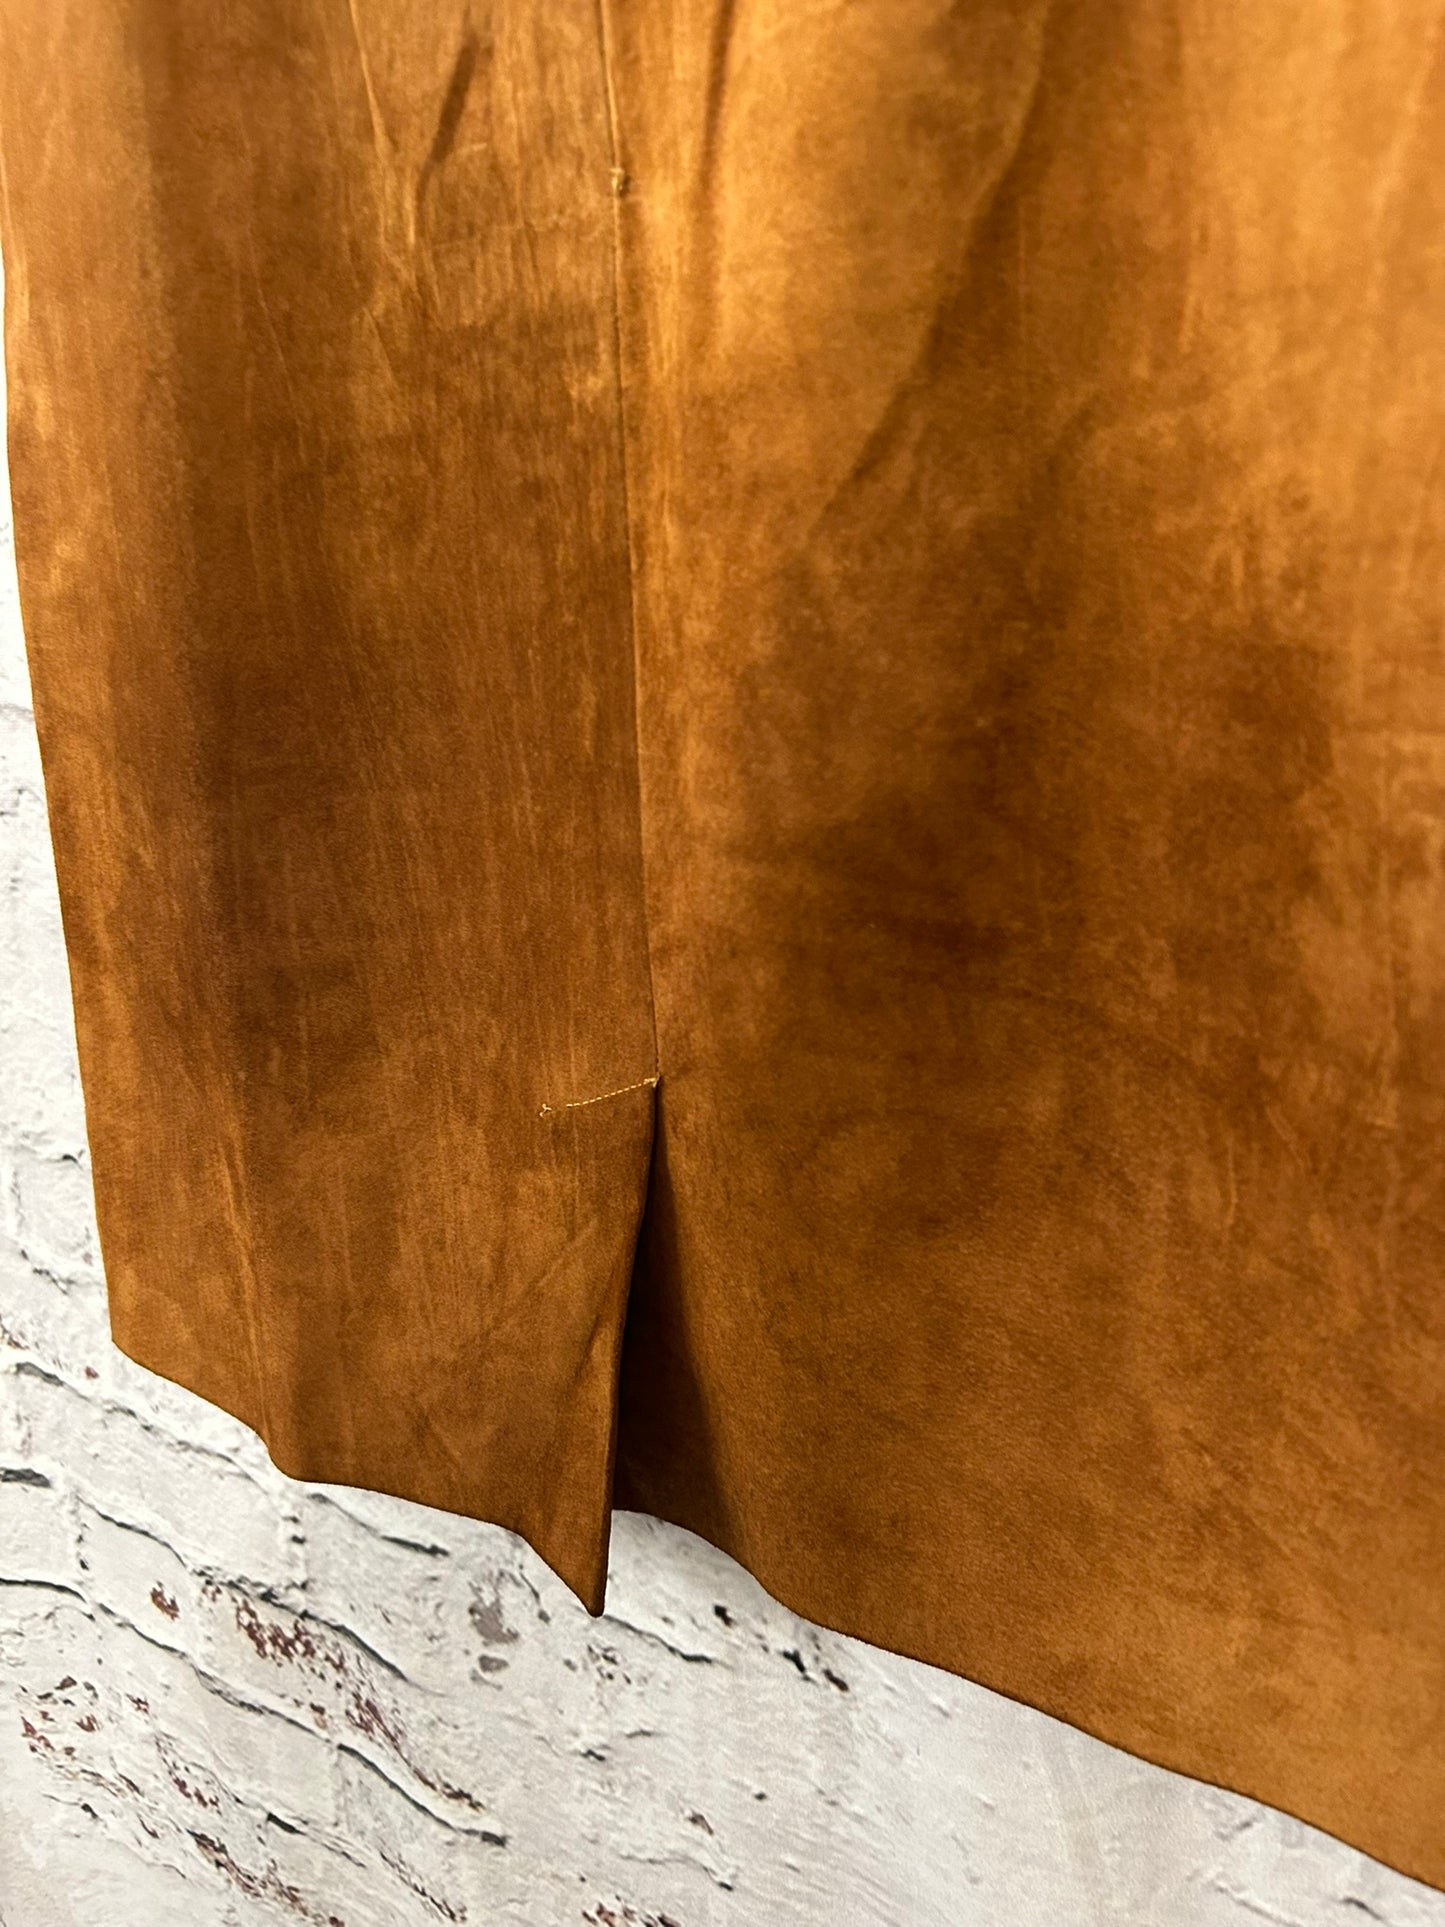 1970s Style Tan Suede Skirt Size 10